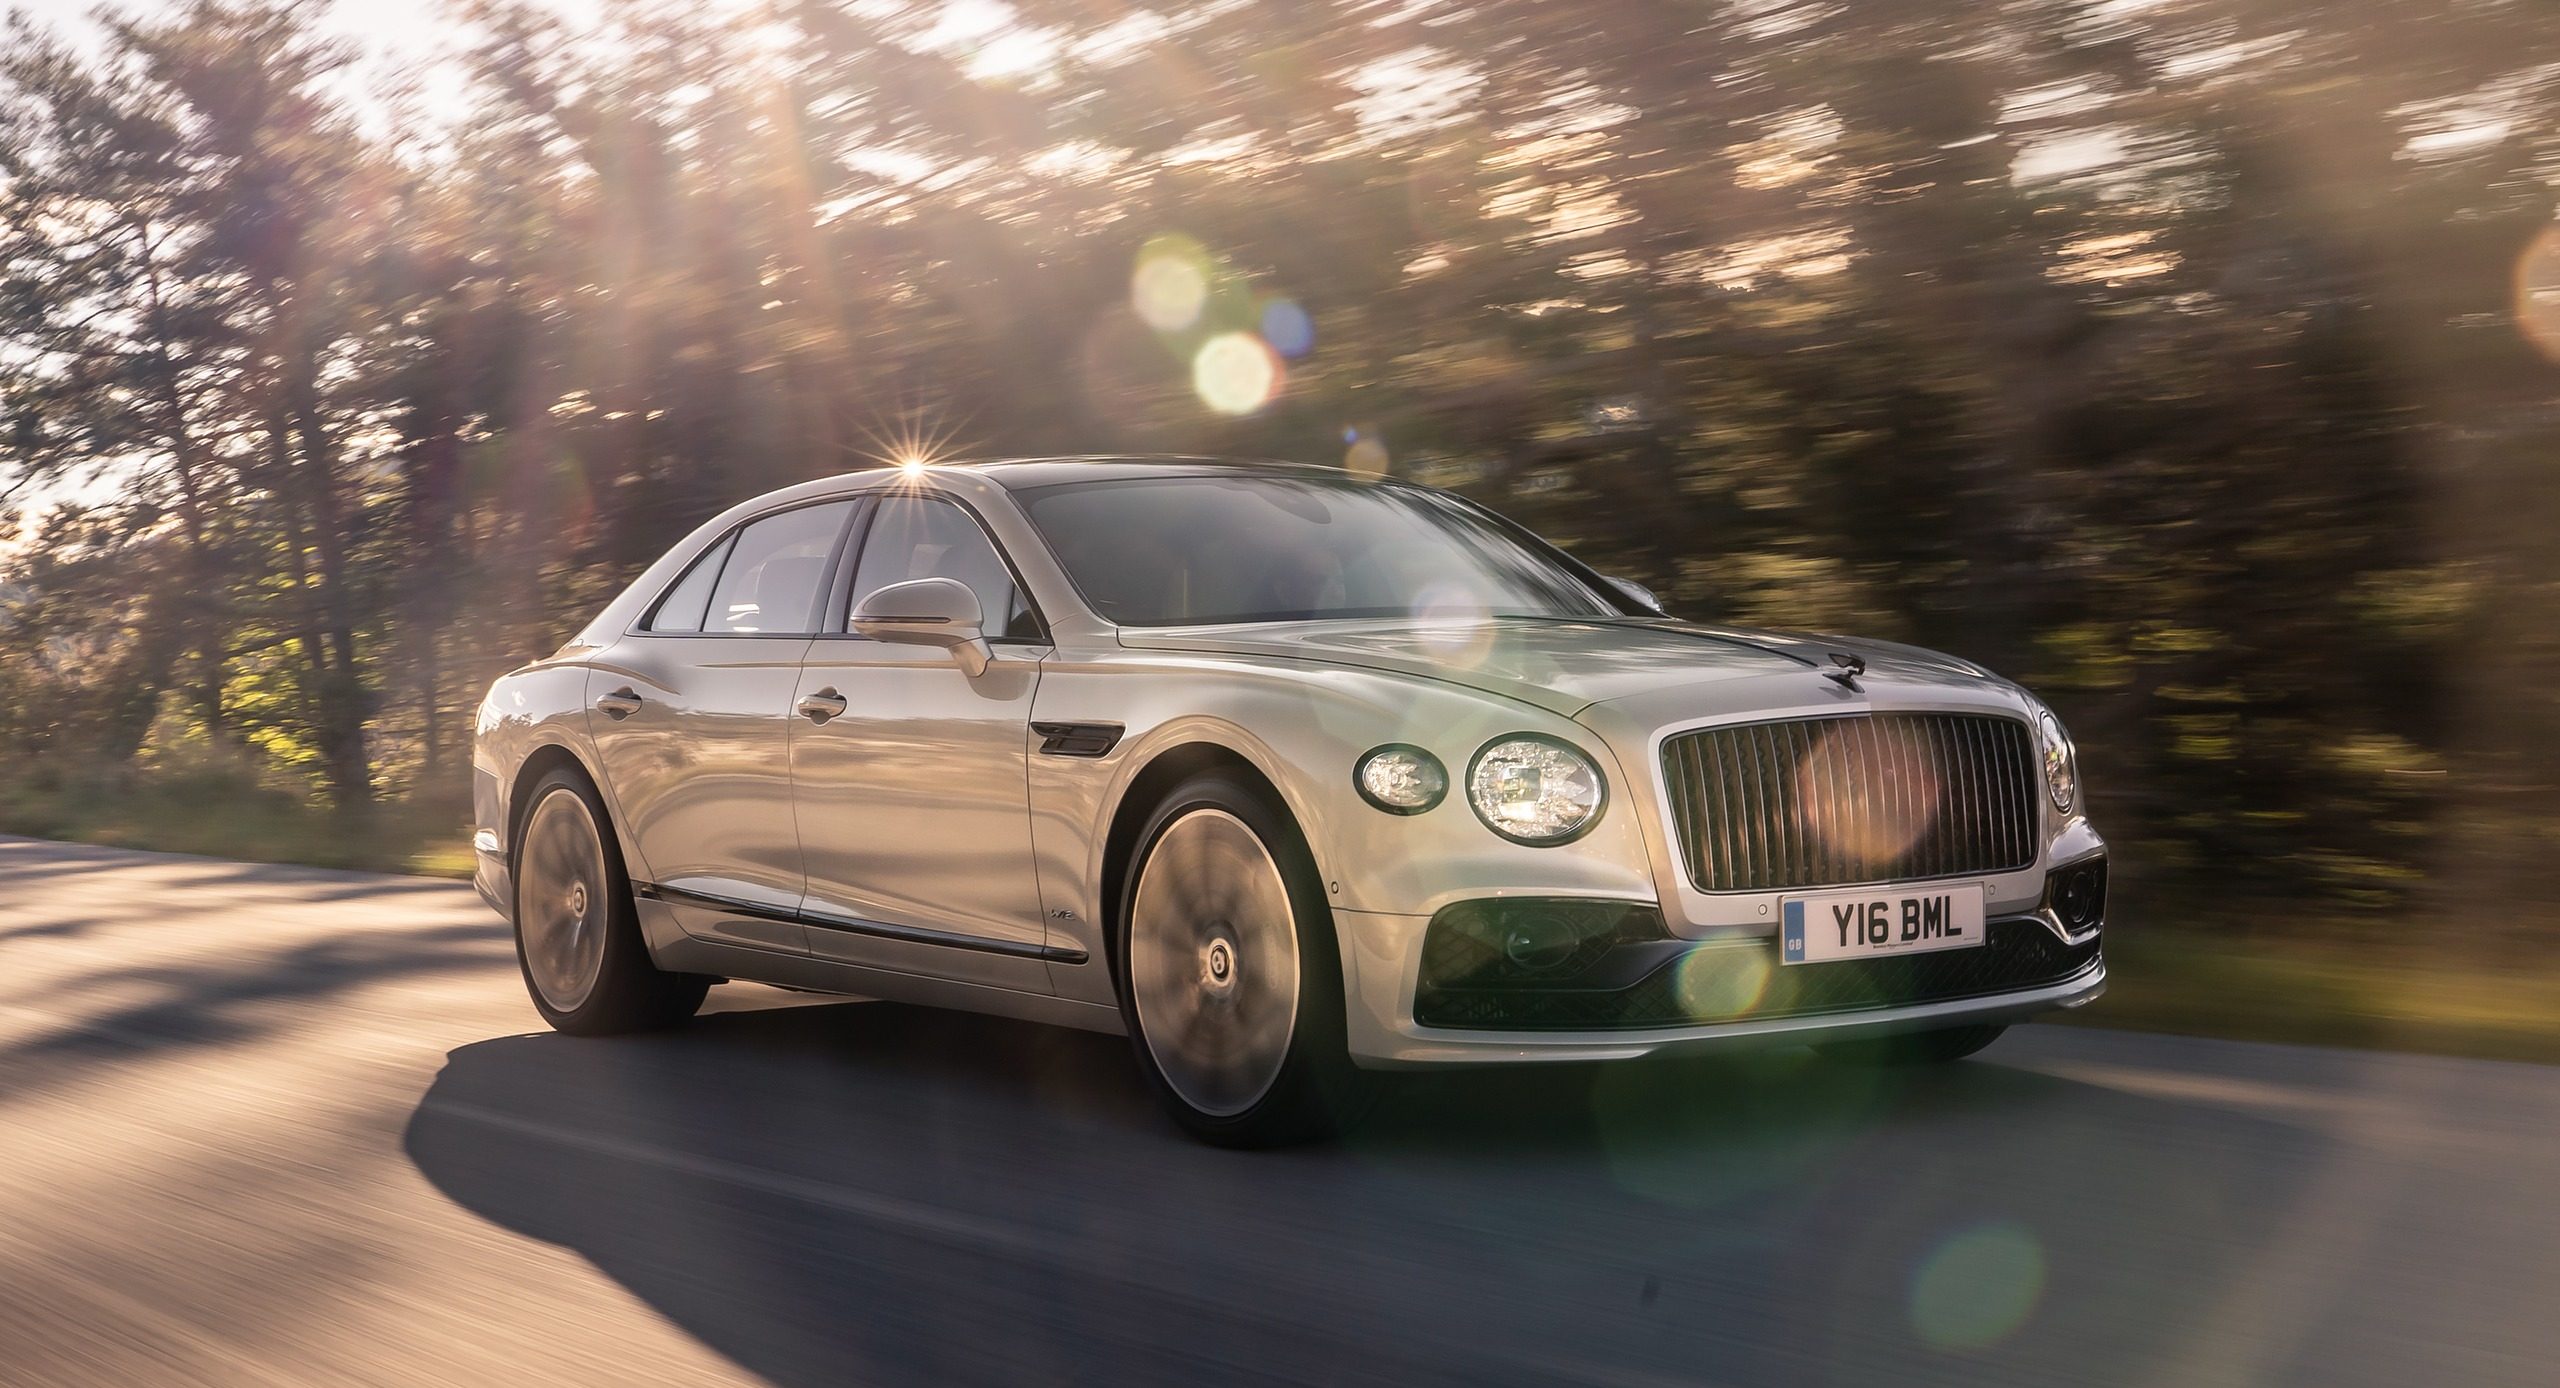 2020 Bentley Flying Spur Wallpapers | SuperCars.net